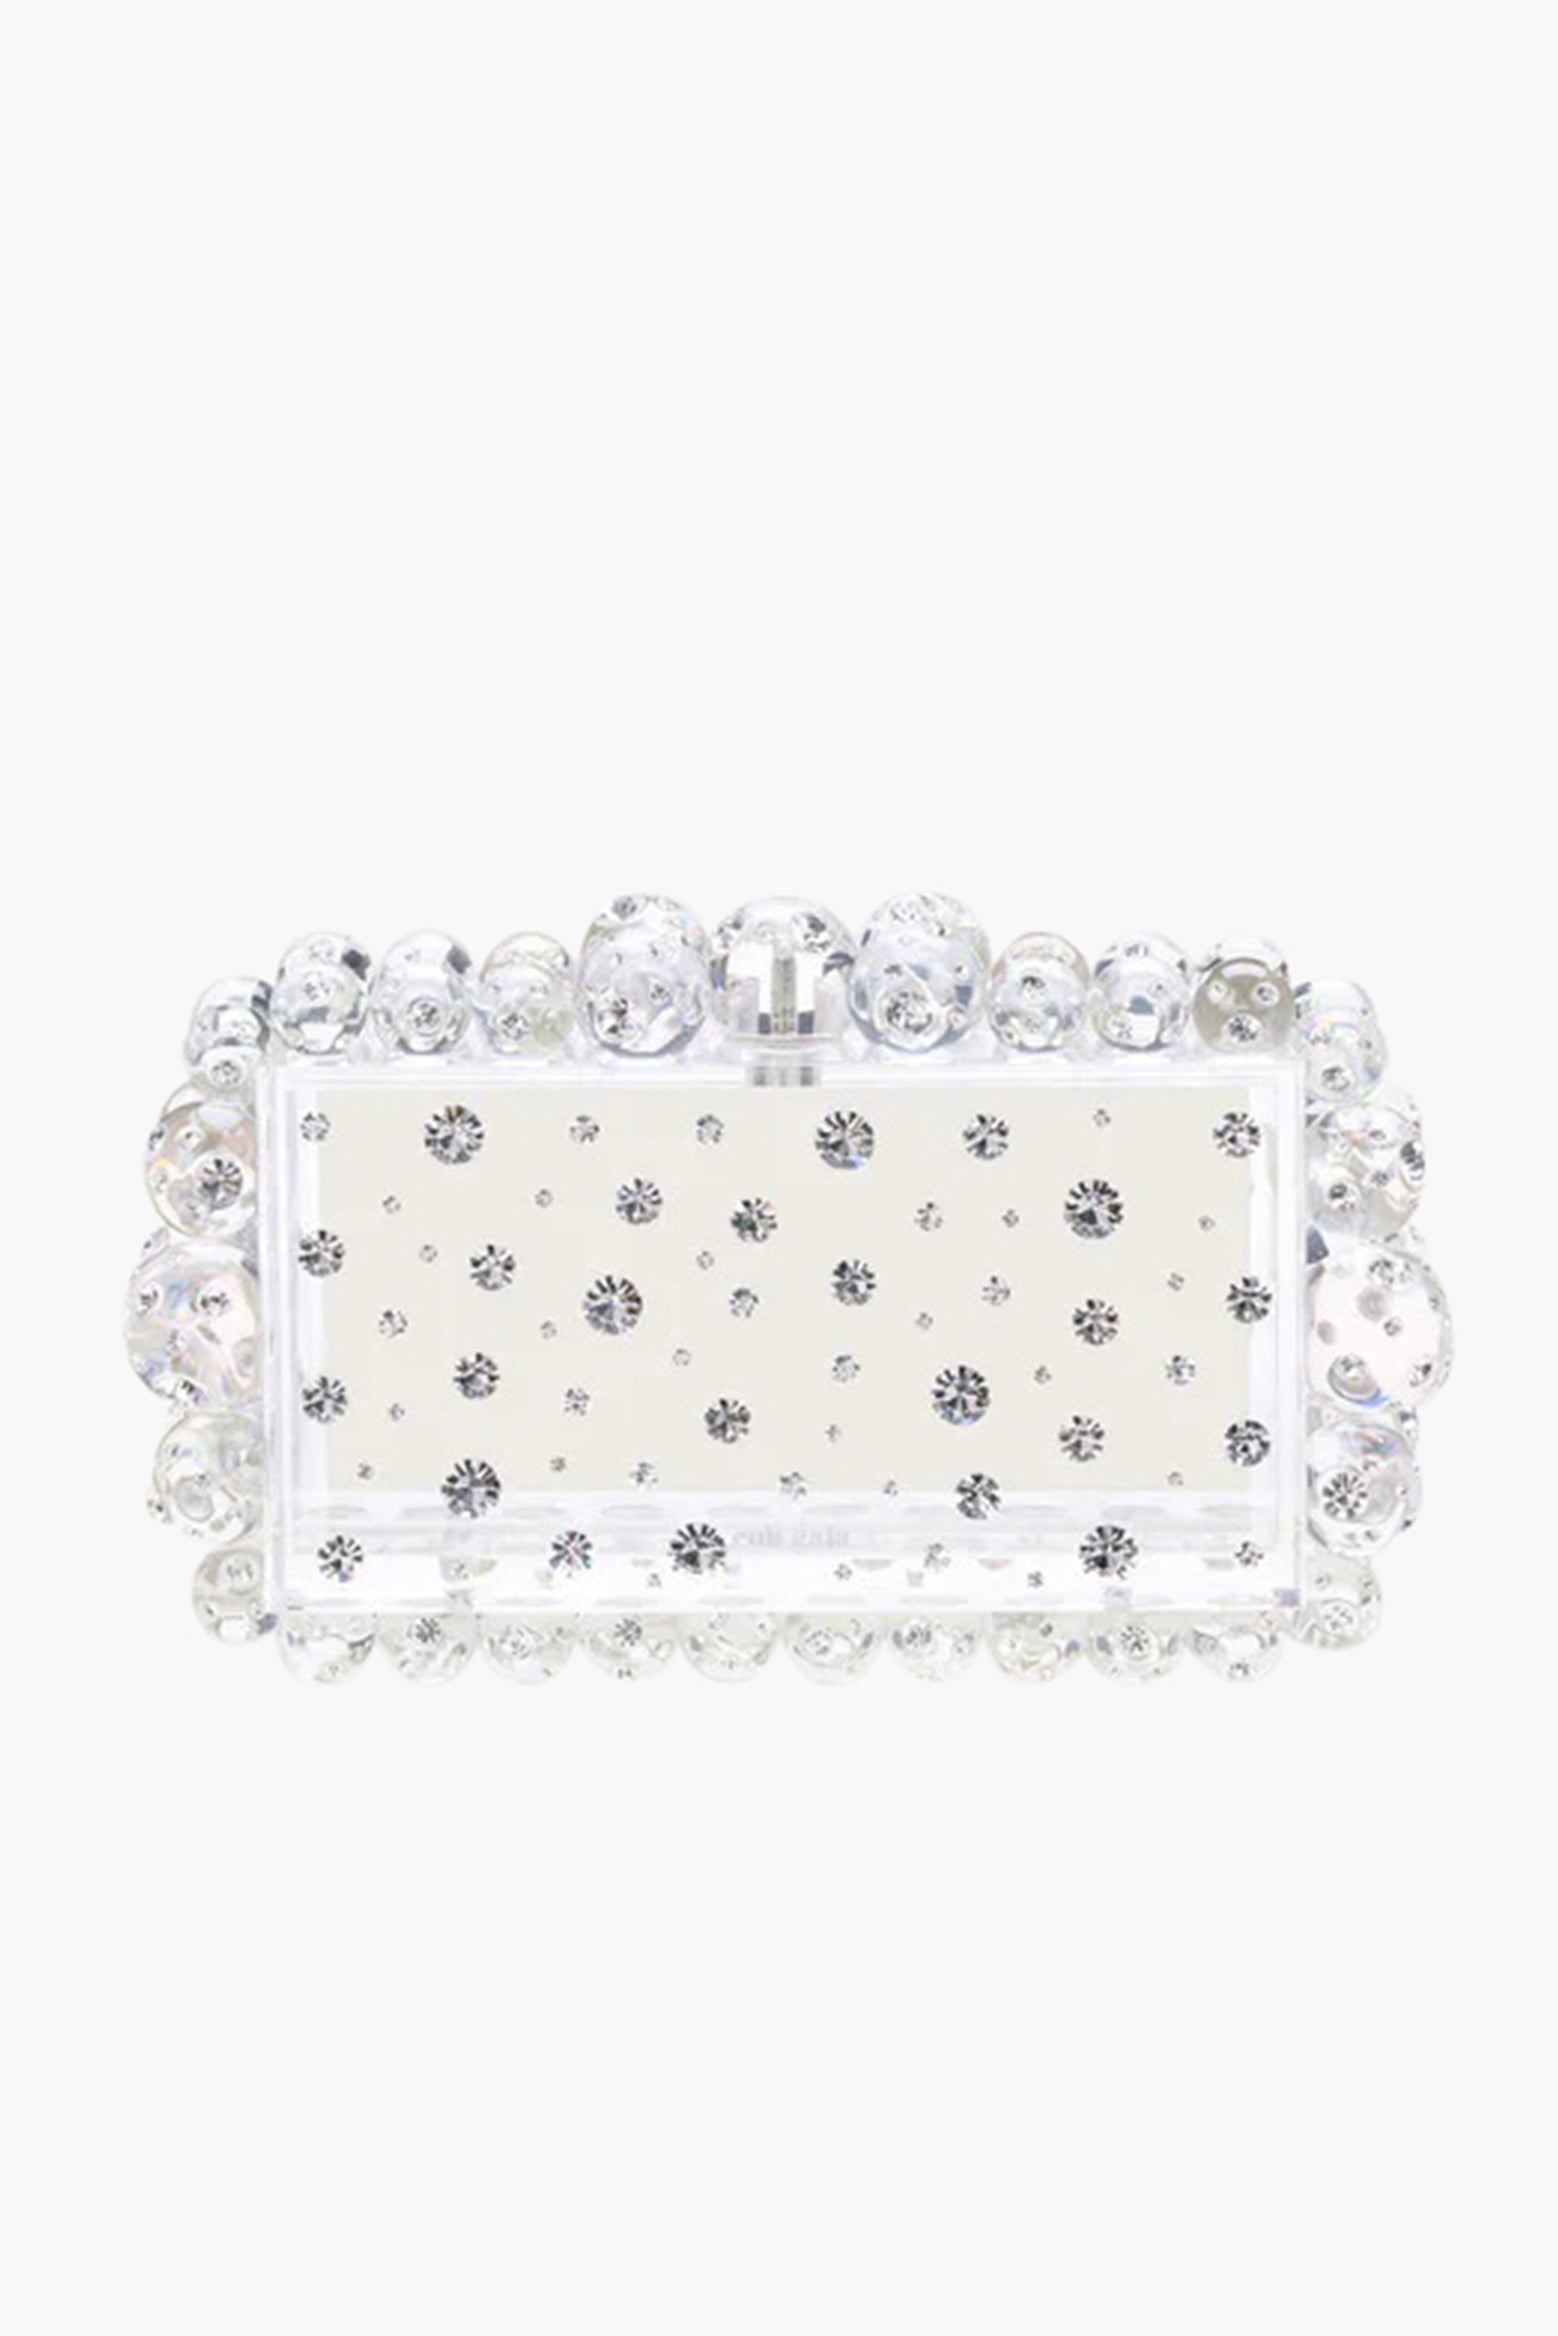 Cult Gaia Eos Clutch in Clear available at The New Trend Australia.